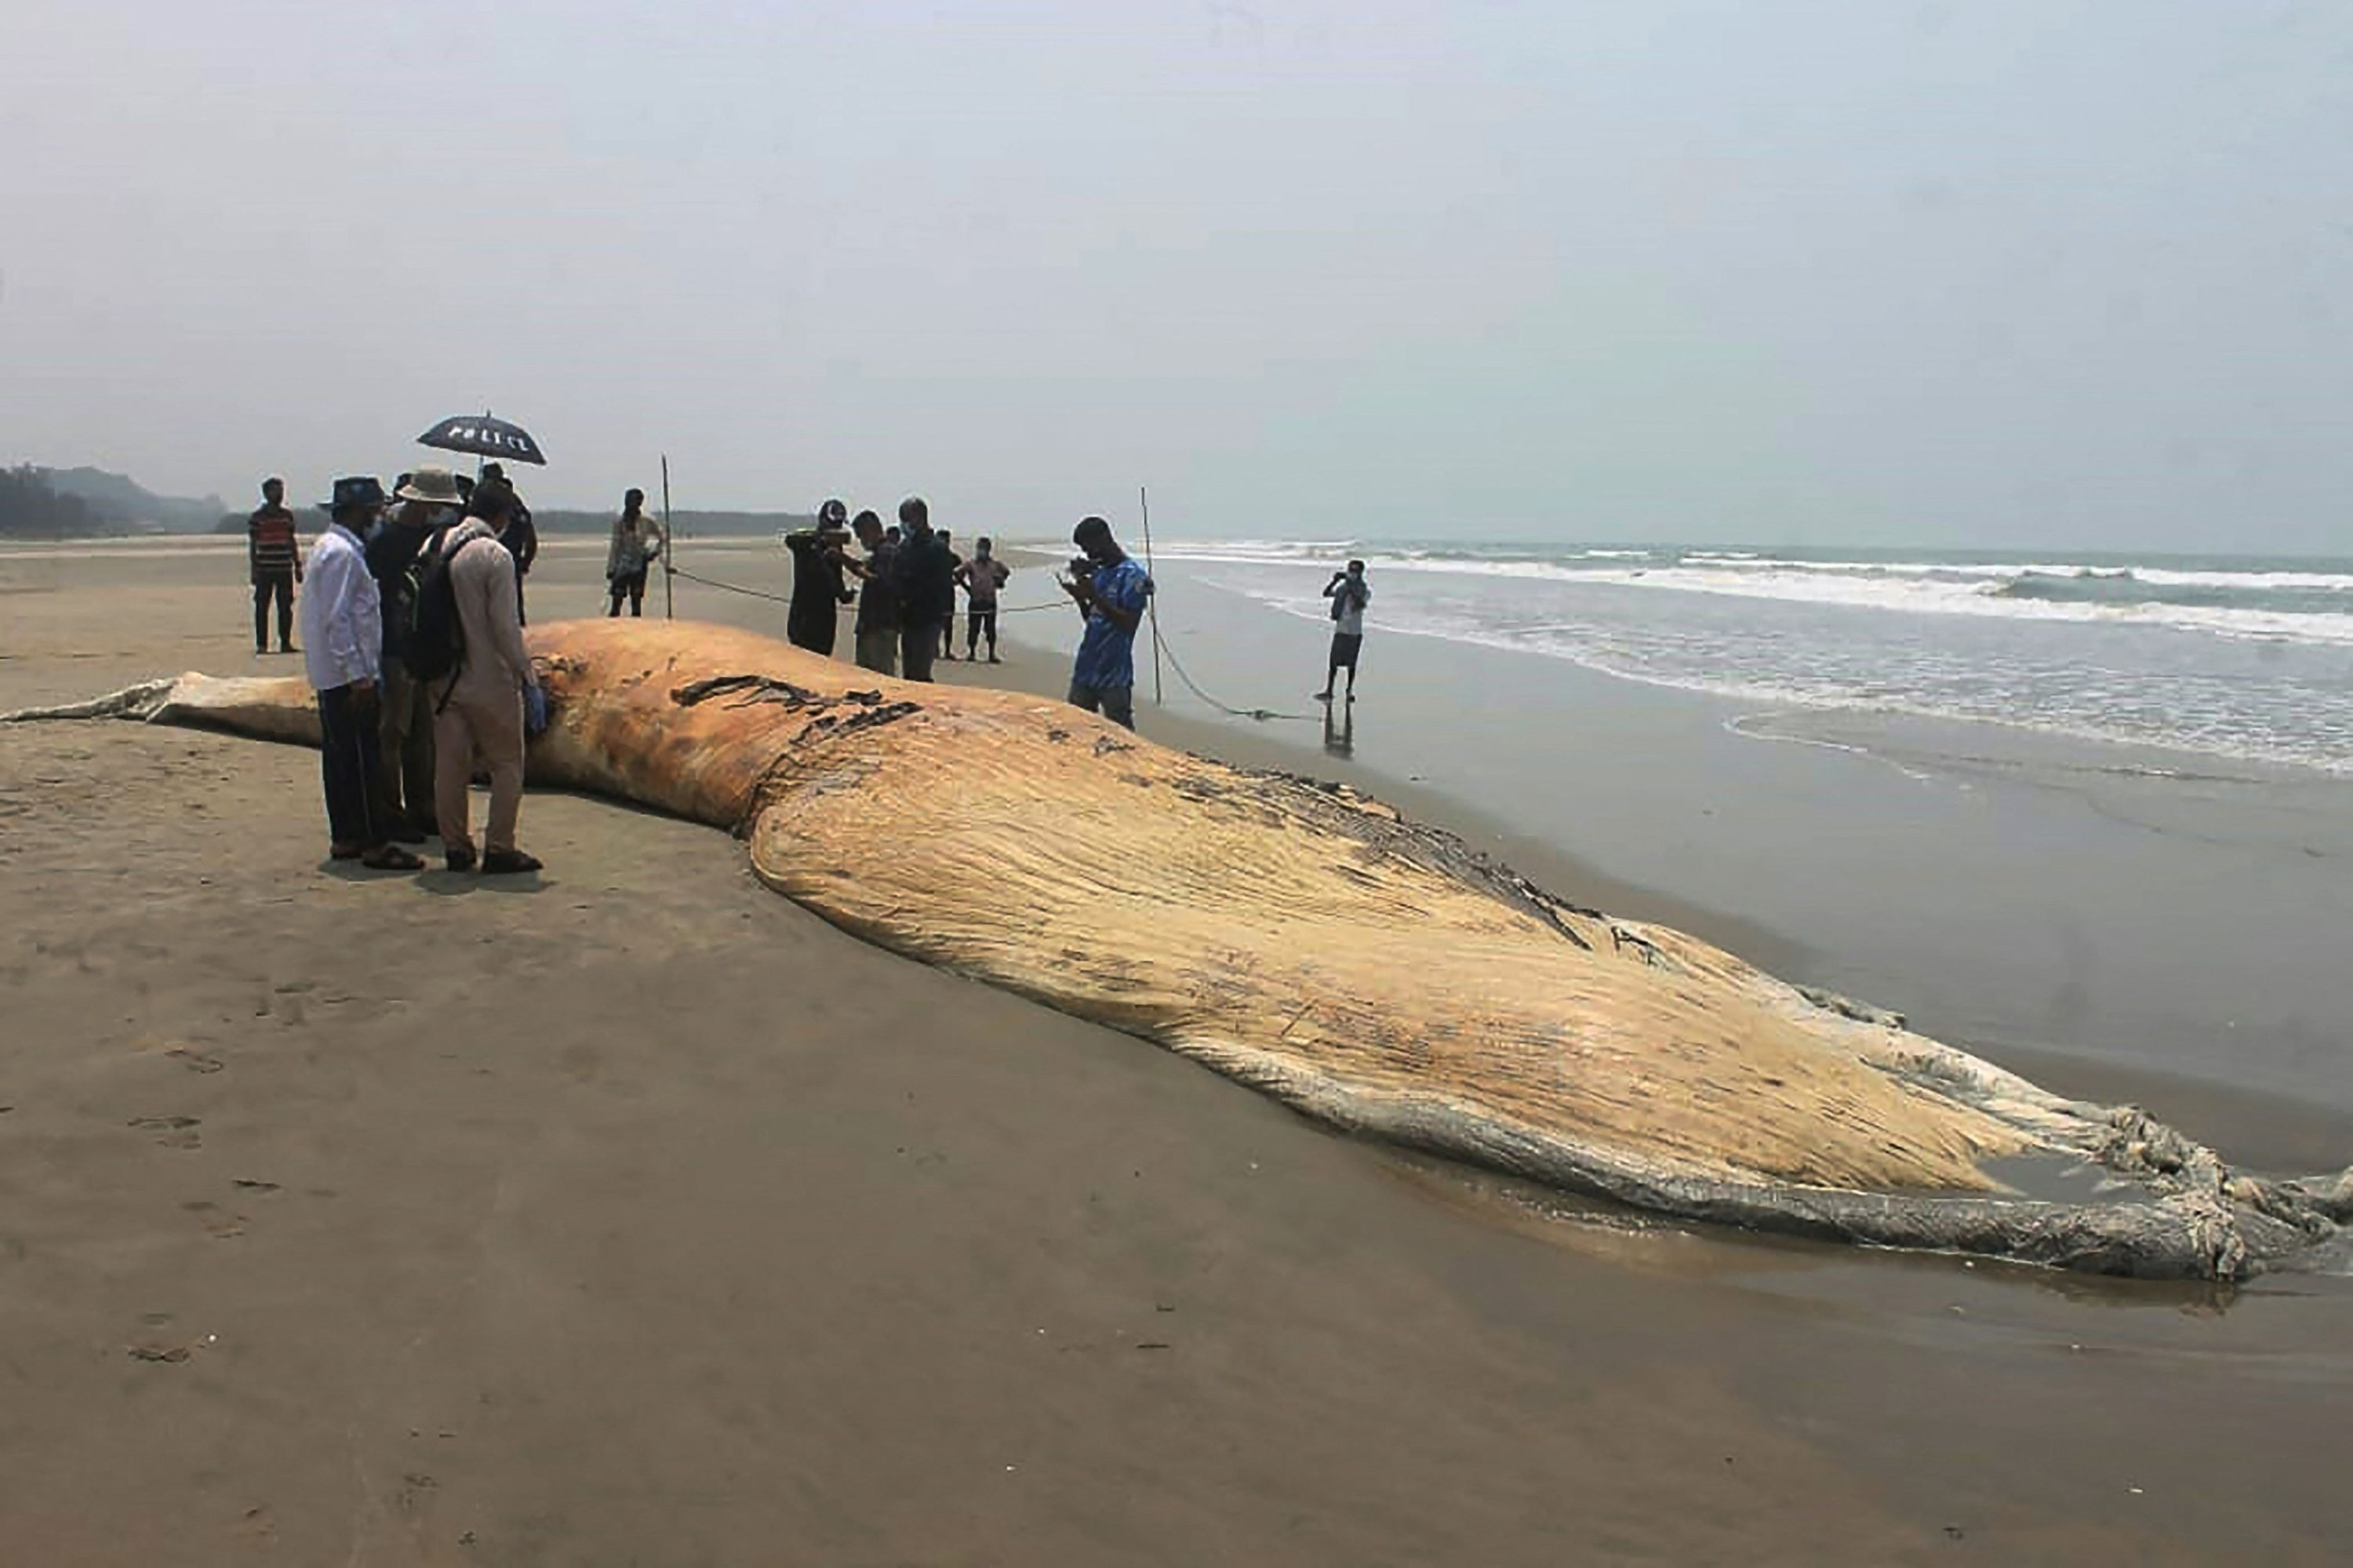 People gather around a dead whale washed ashore on a beach in Cox